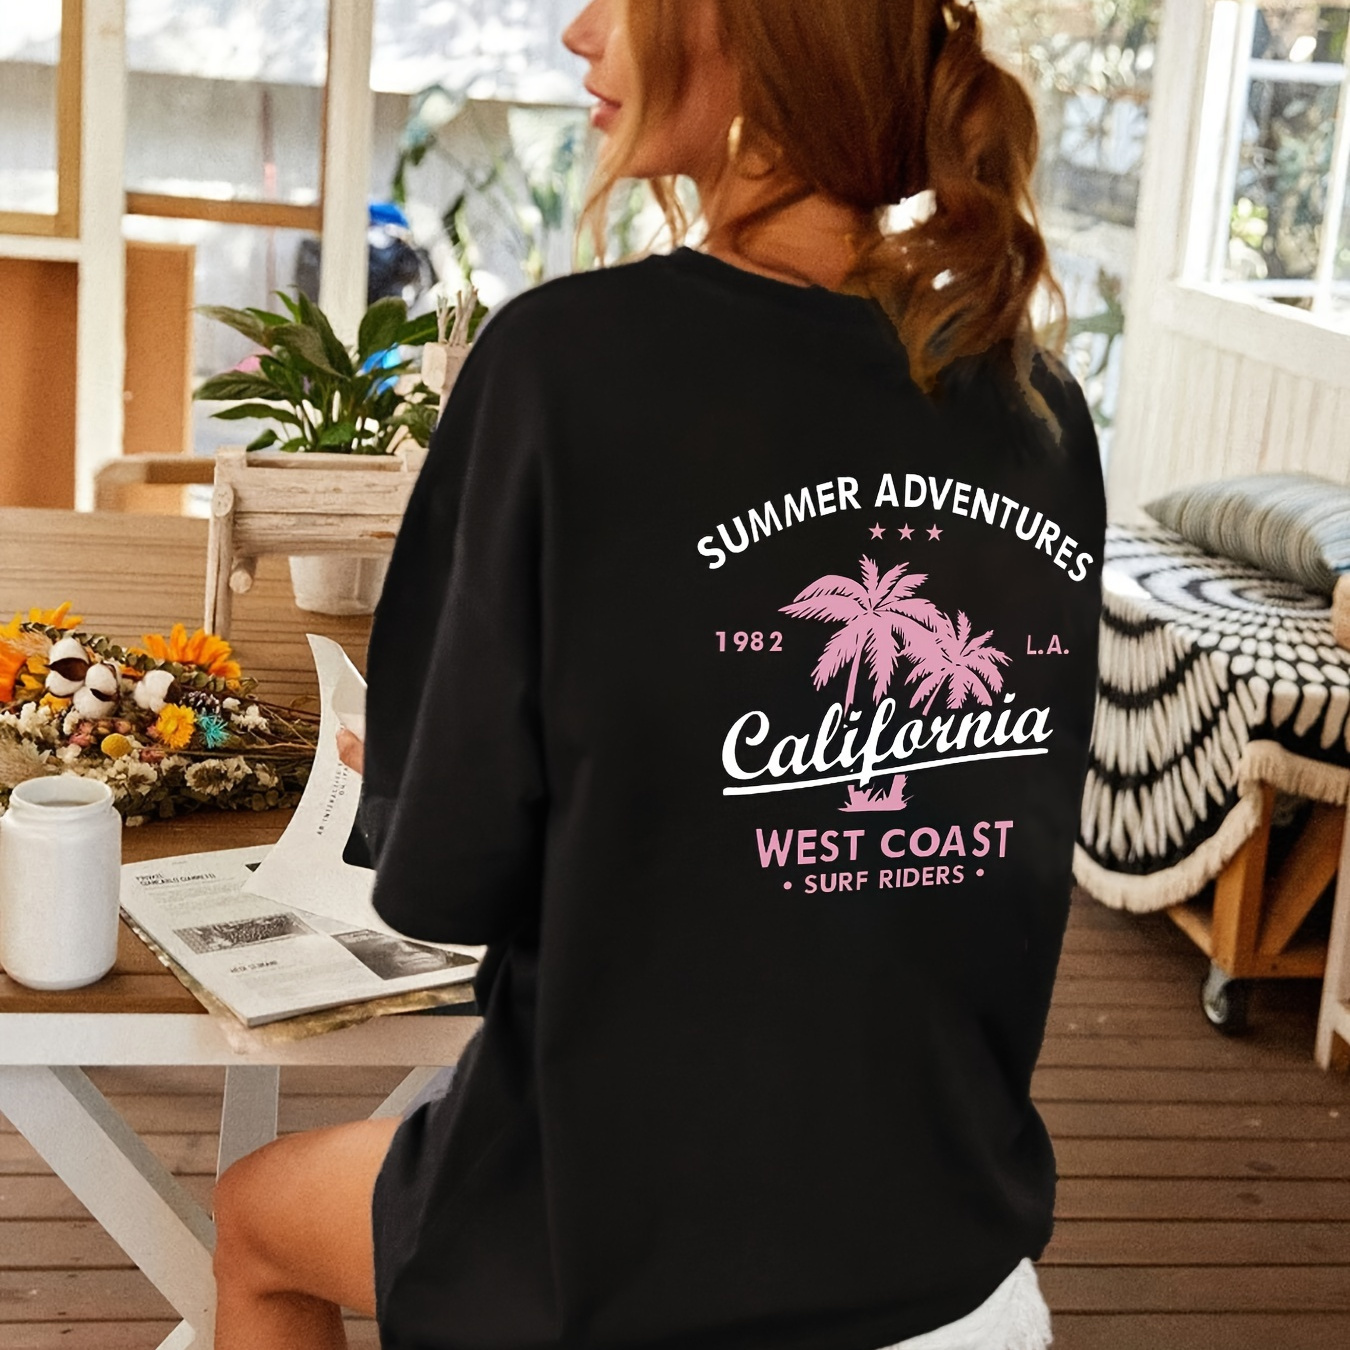 

Women's Casual Letter Print T-shirt, Comfortable Sporty Top, Loose Fit, With"california" Graphics, Summer Adventures Style